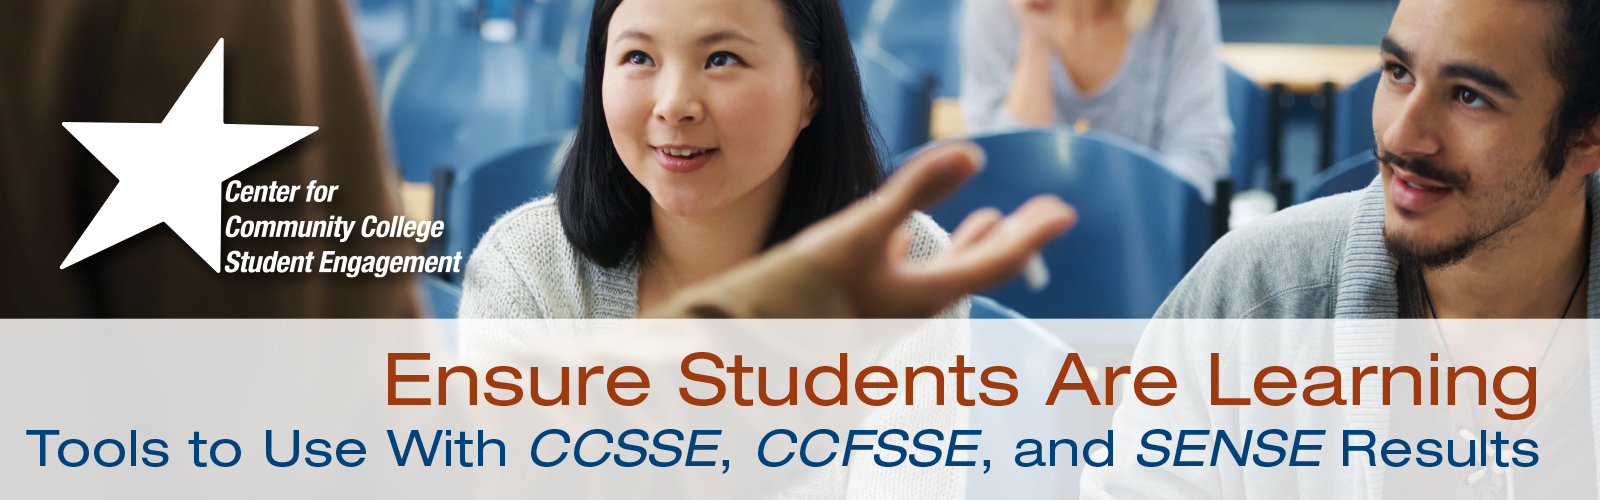 Ensure Students Are Learning: Tools to use with CCSSE, CCFSSE, and SENSE Results